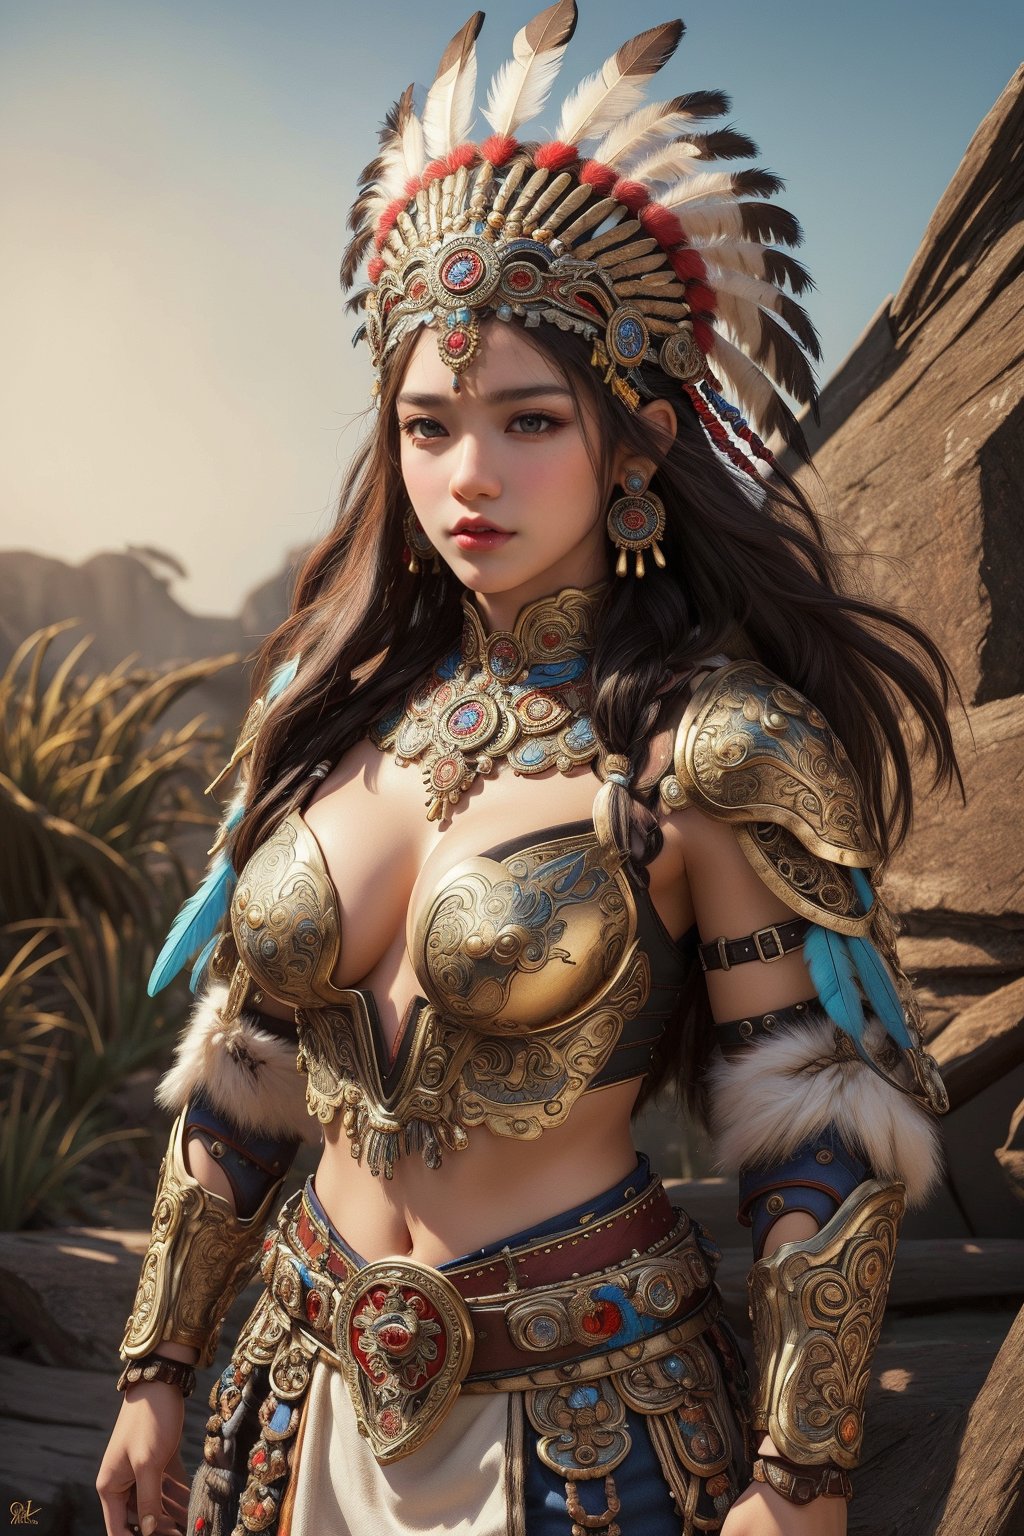 busty and sexy girl, 8k, masterpiece, ultra-realistic, best quality, high resolution, high definition, indigenous Mesoamerican cultures, elaborate headdress with feathers , detailed armor with intricate designs, Aztec warriors, The gold-colored belt with a central medallion and animal depiction on the chest piece adds to the warrior aesthetic, shoulder armors